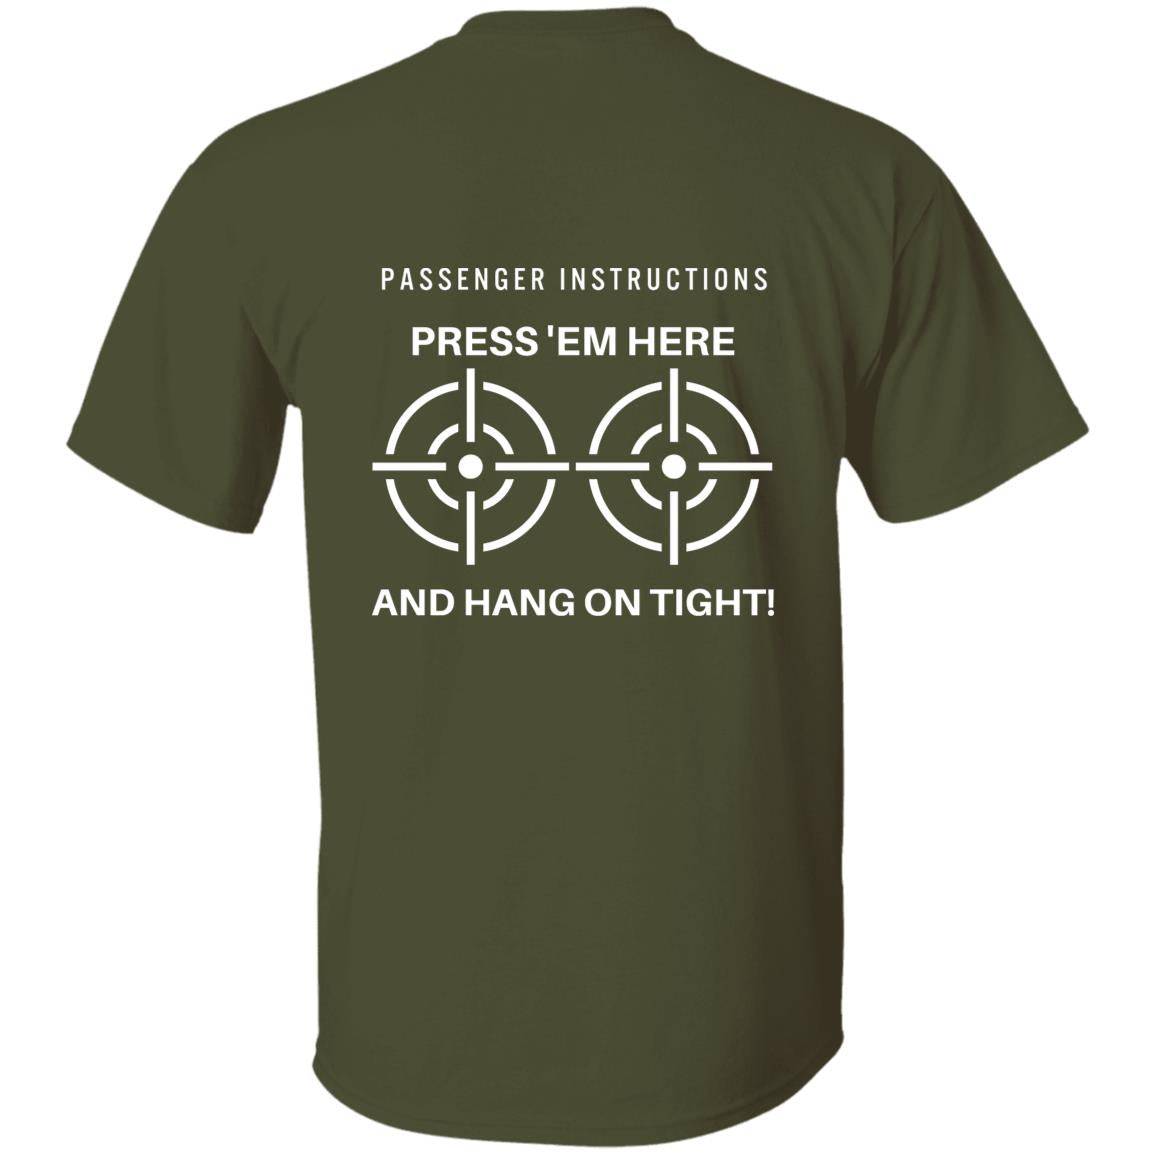 Back of the military green Passenger Instruction heavyweight classic unisex t-shirt in 100% cotton. The front is blank; the back has two bulls eyes printed and reads "Press 'em here and hang on tight!"